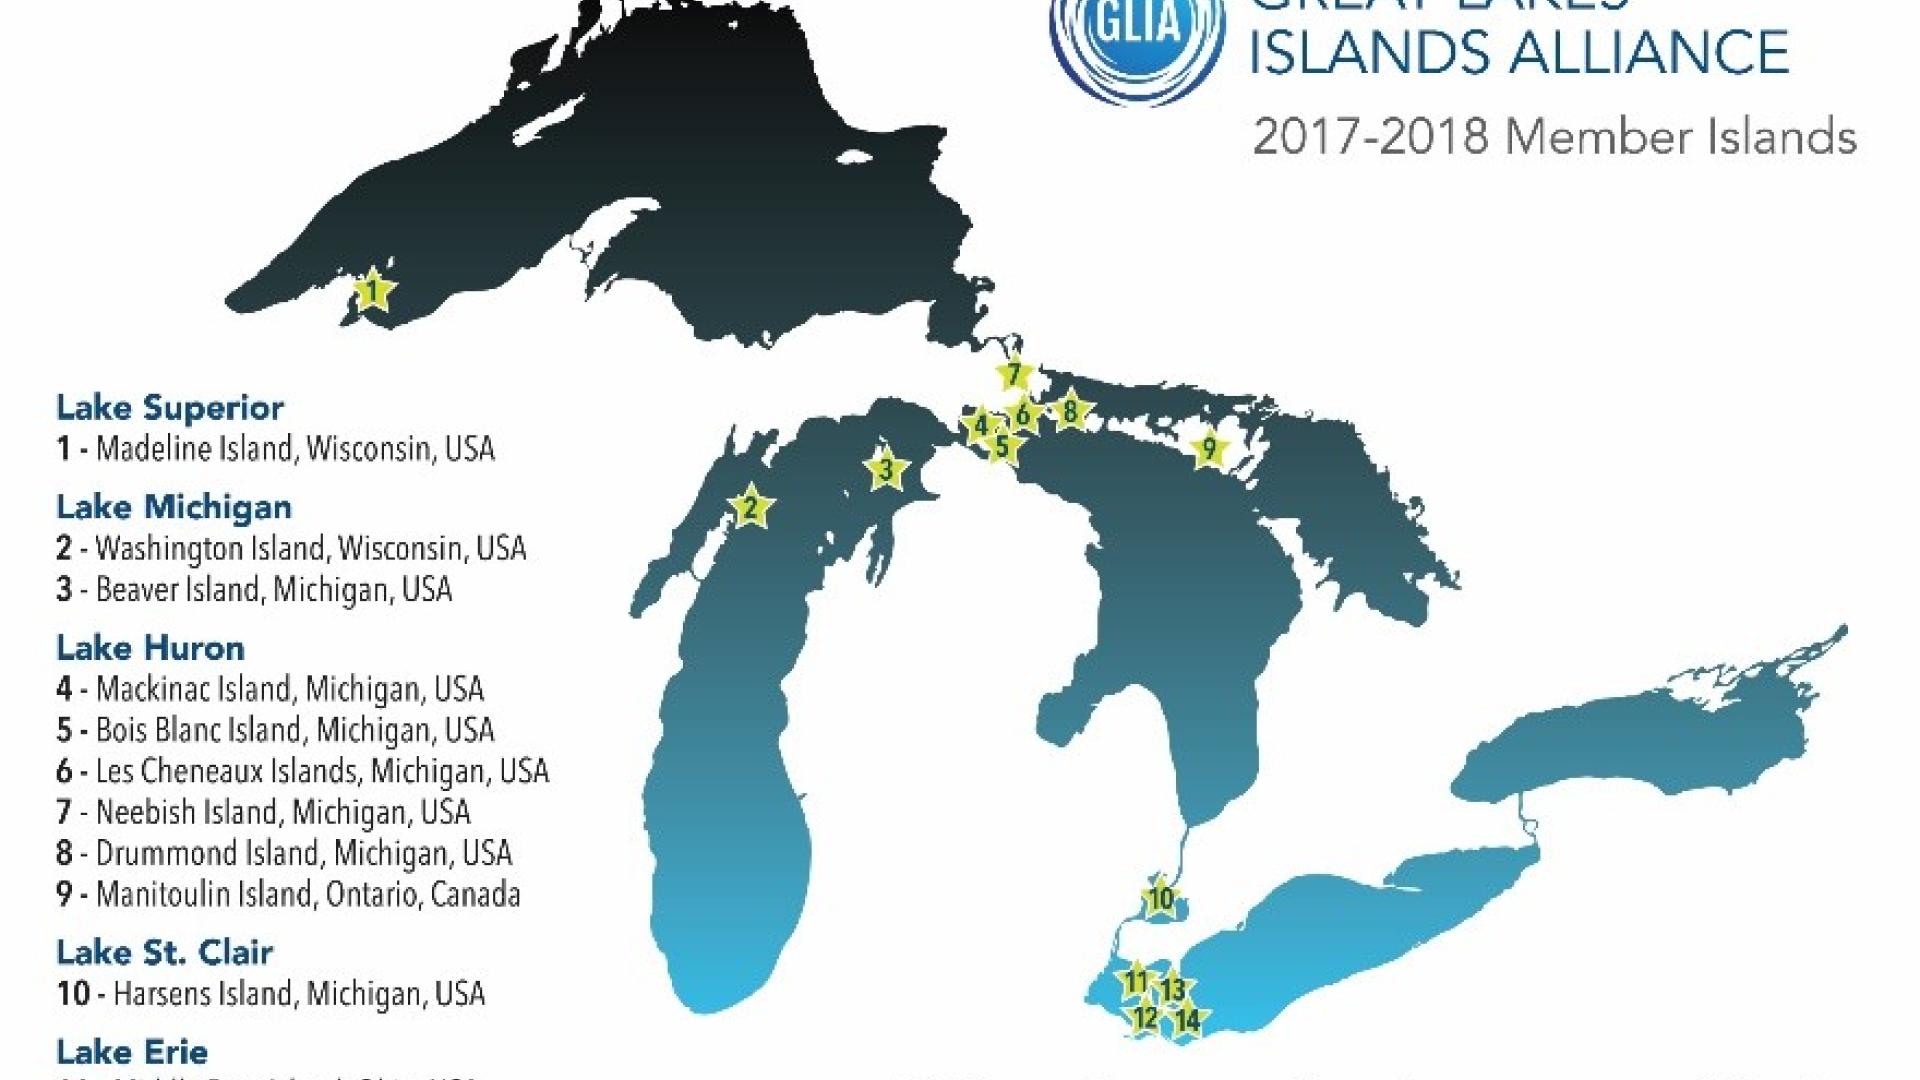 great lakes island alliance map